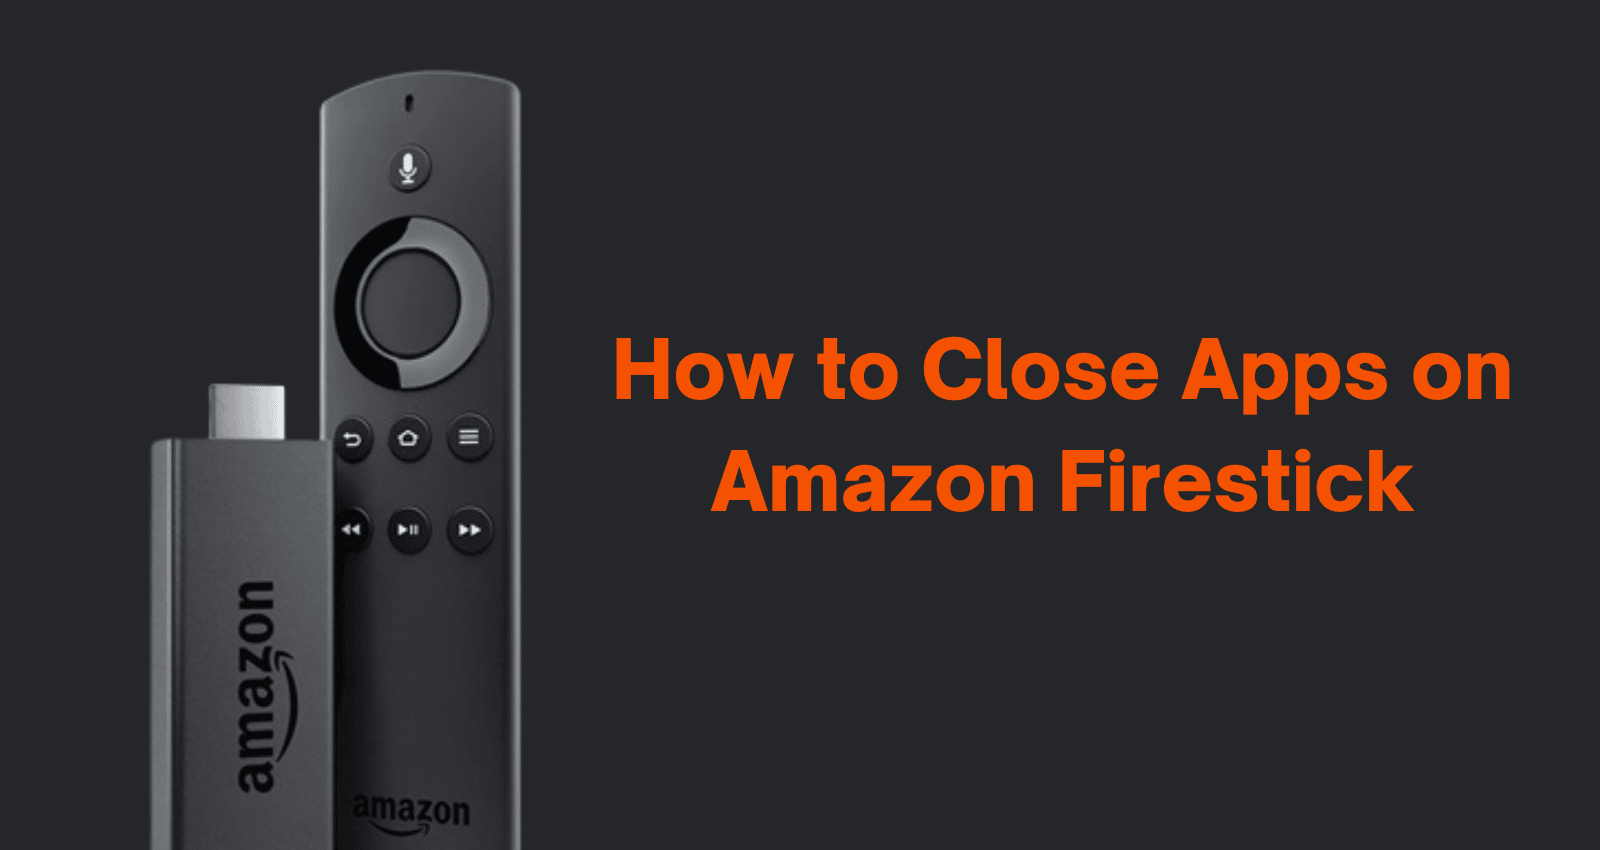 How to Close Apps on Amazon Firestick (1)